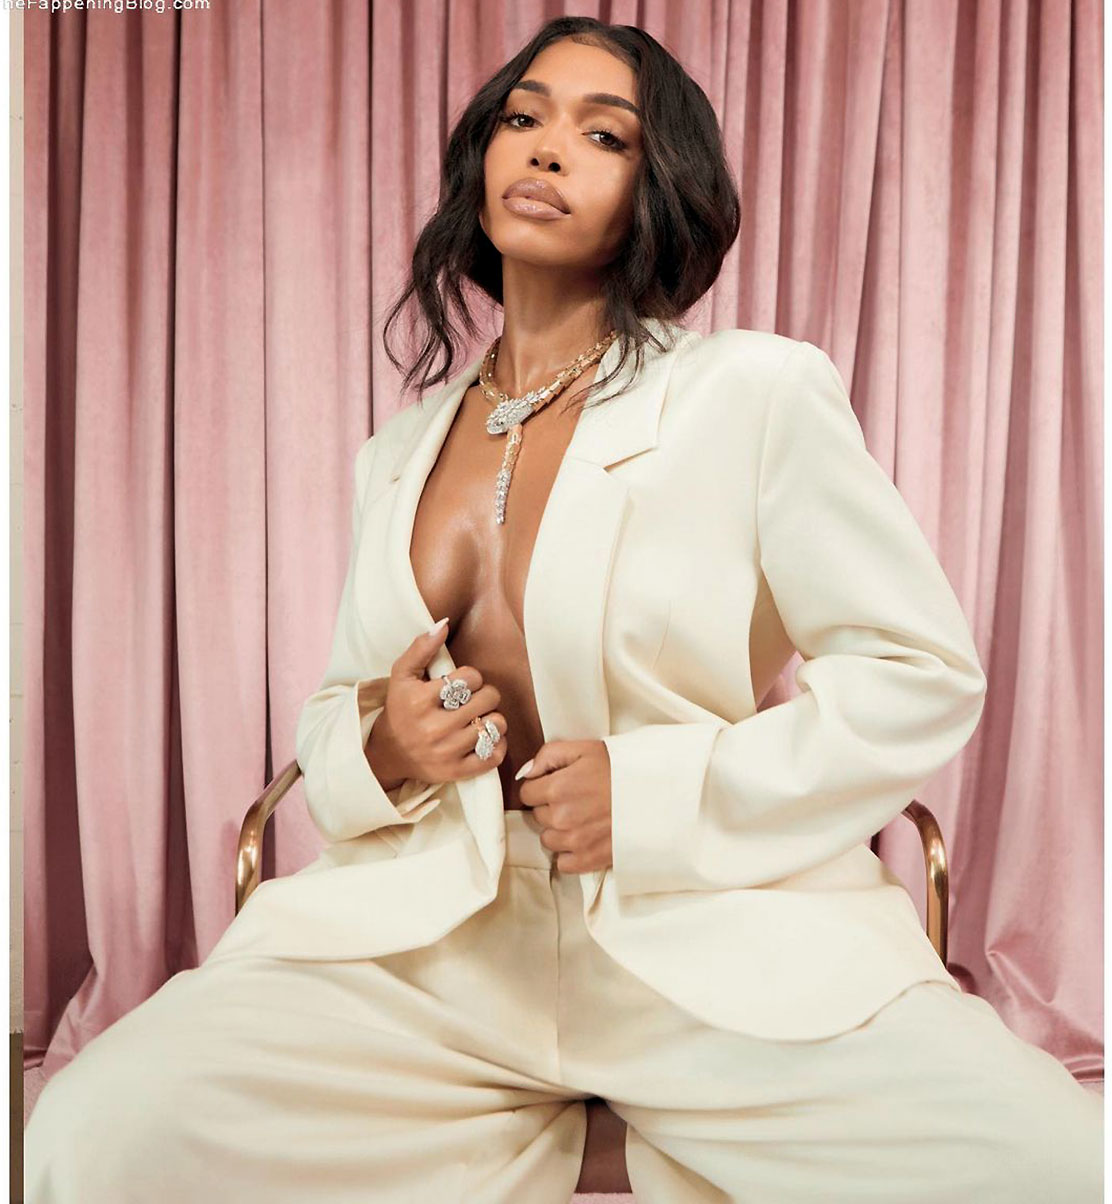 So, I thought I should show you some of the newest Lori Harvey hot photos c...